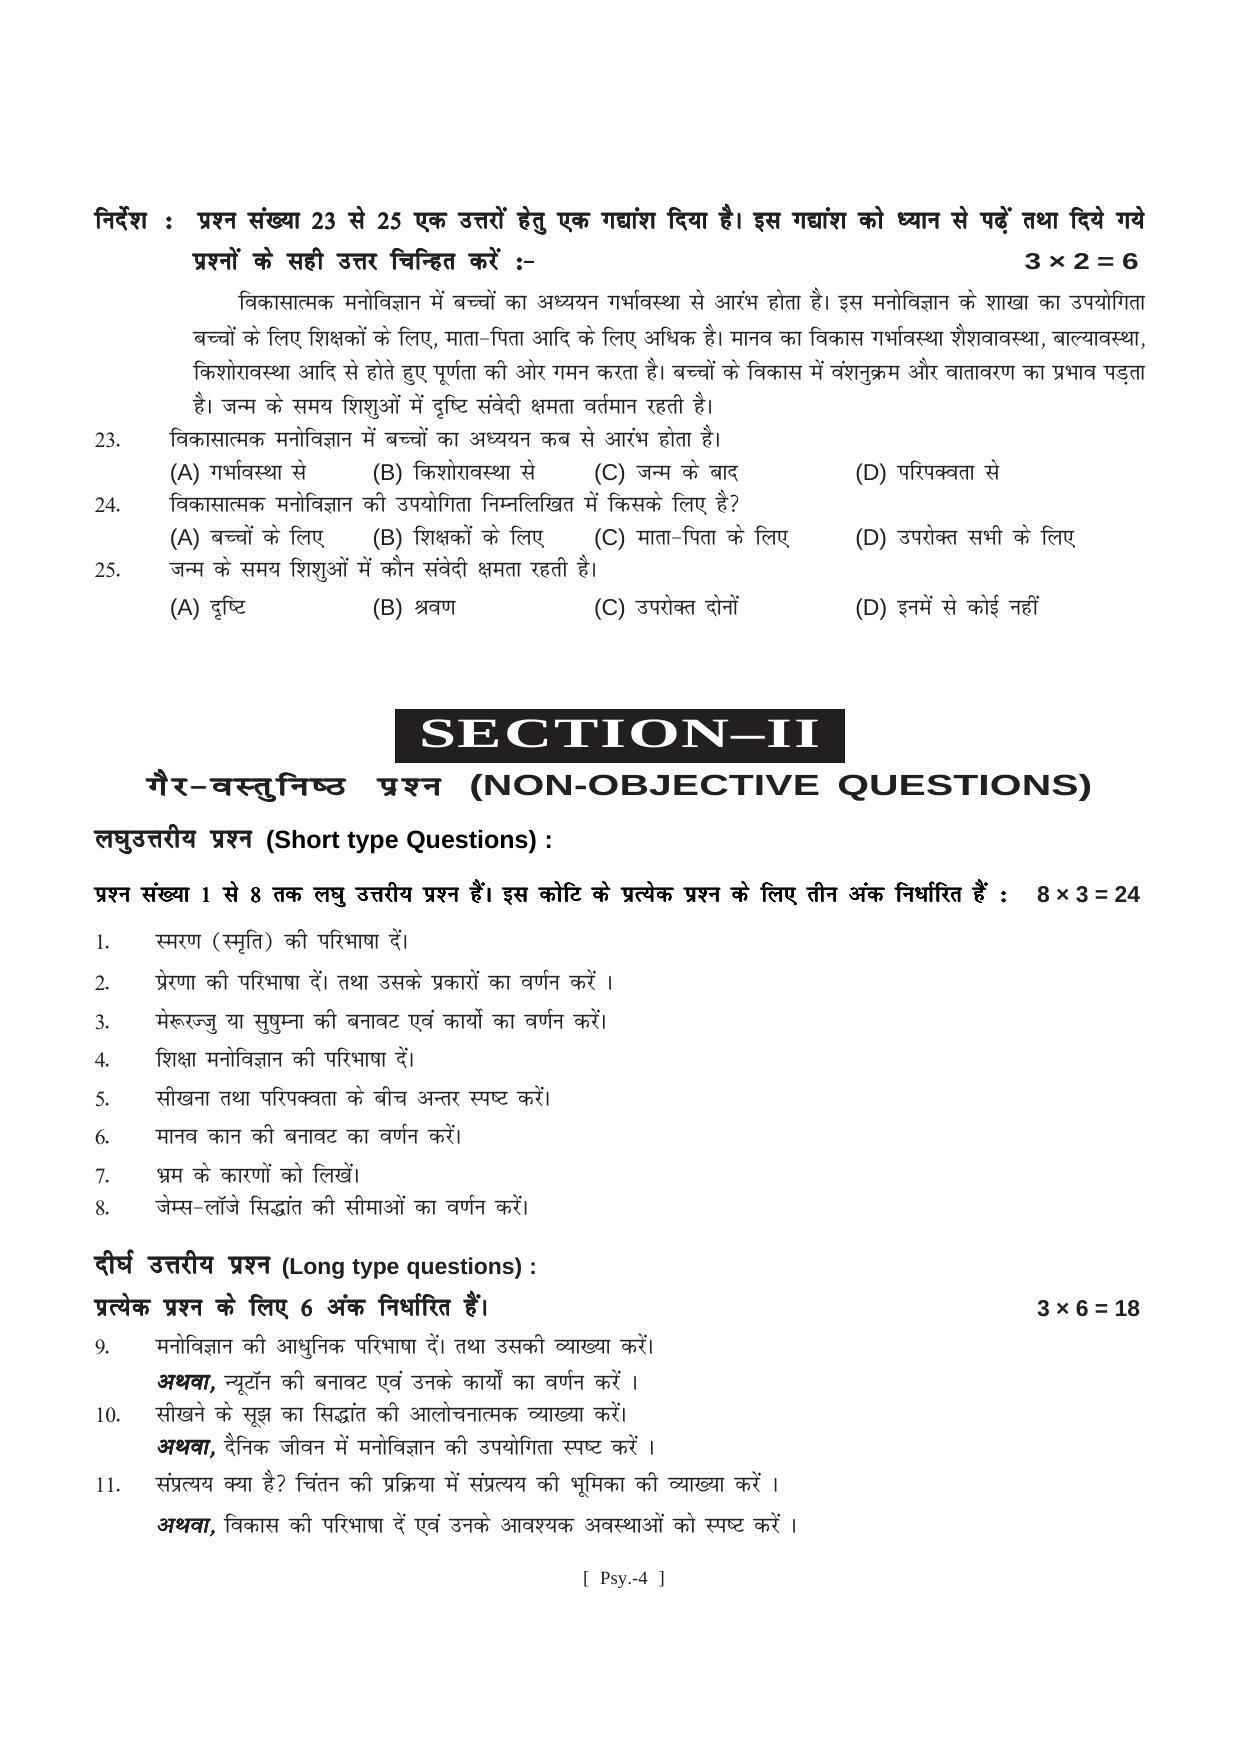 Bihar Board Class 11 Psychology (All Groups) Model Paper - Page 4